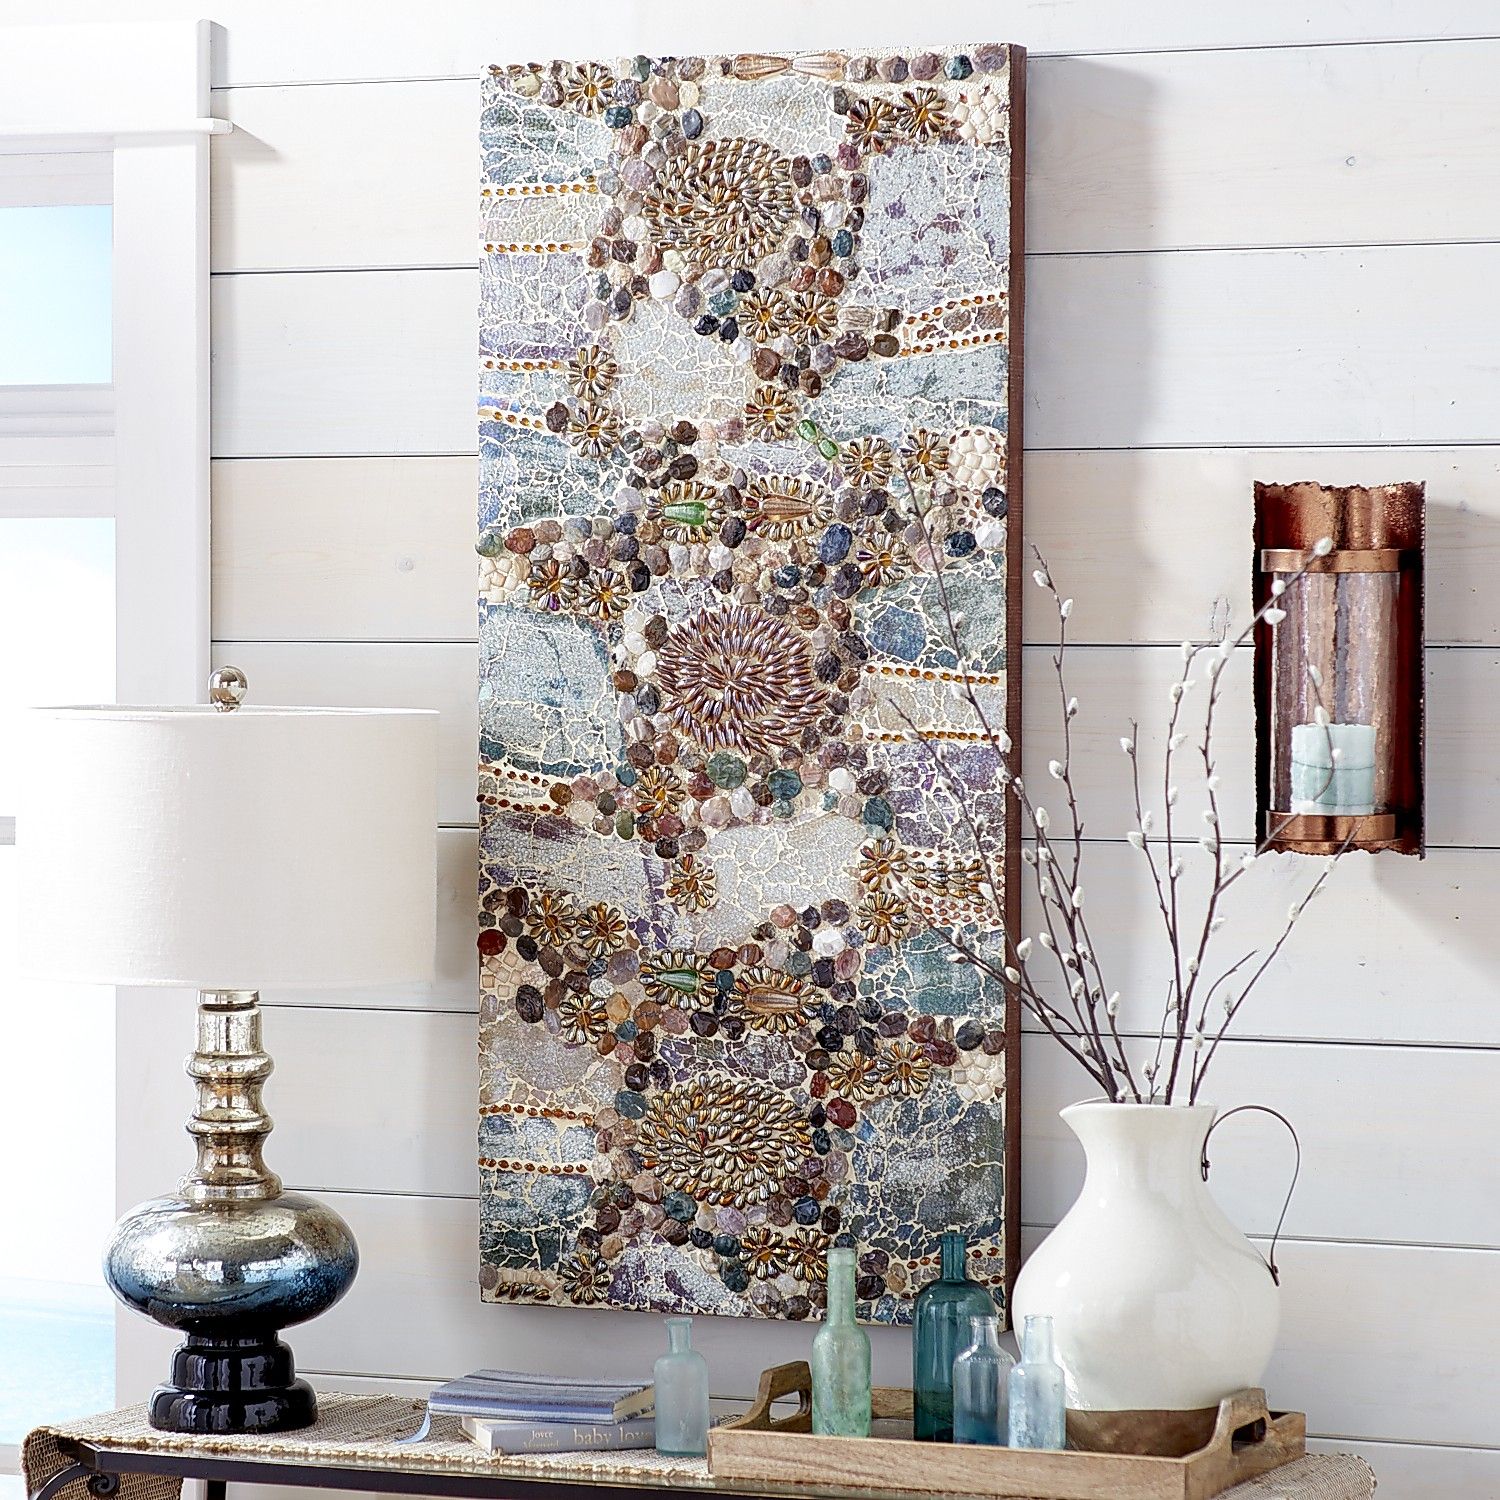 Stone Collage Wall Decor – Pier1 Intended For Stones Wall Art (View 9 of 15)